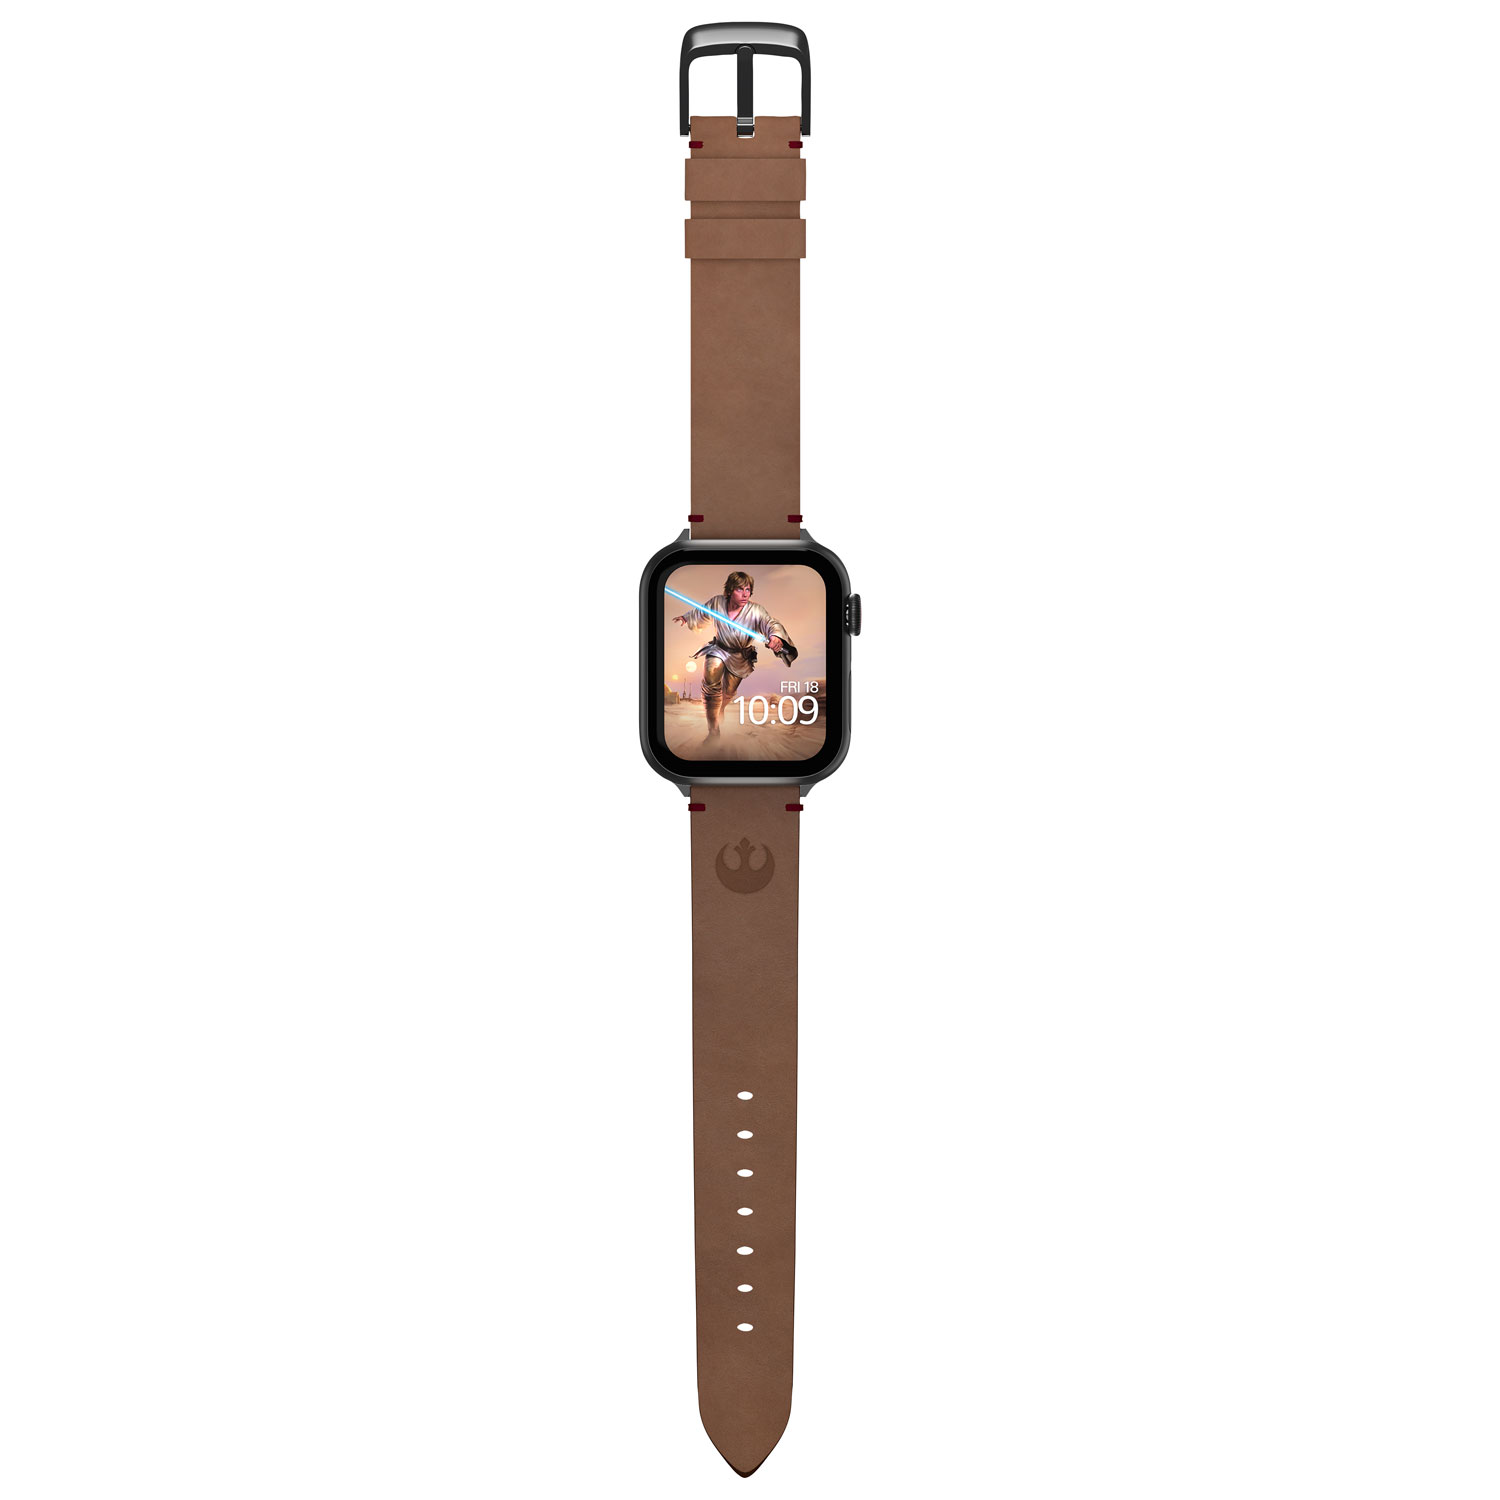 MobyFox Star Wars Leather Band for Apple Watch - Rebel Alliance